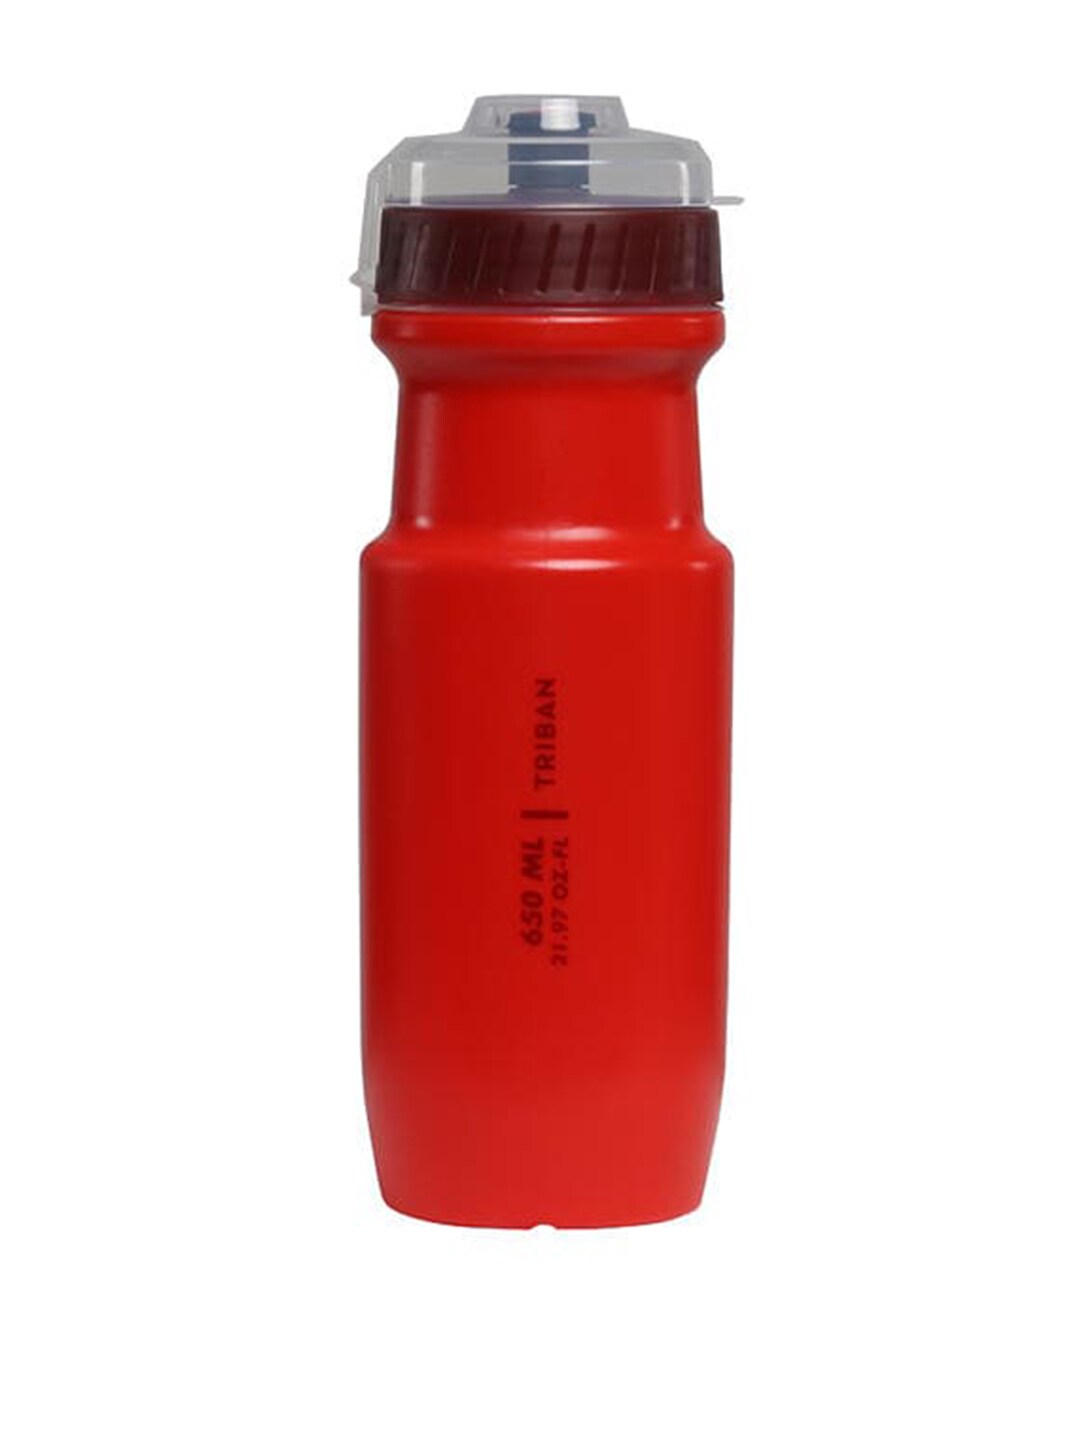 TRIBAN By Decathlon Red RoadC Sipper Bottle 650ml Price in India